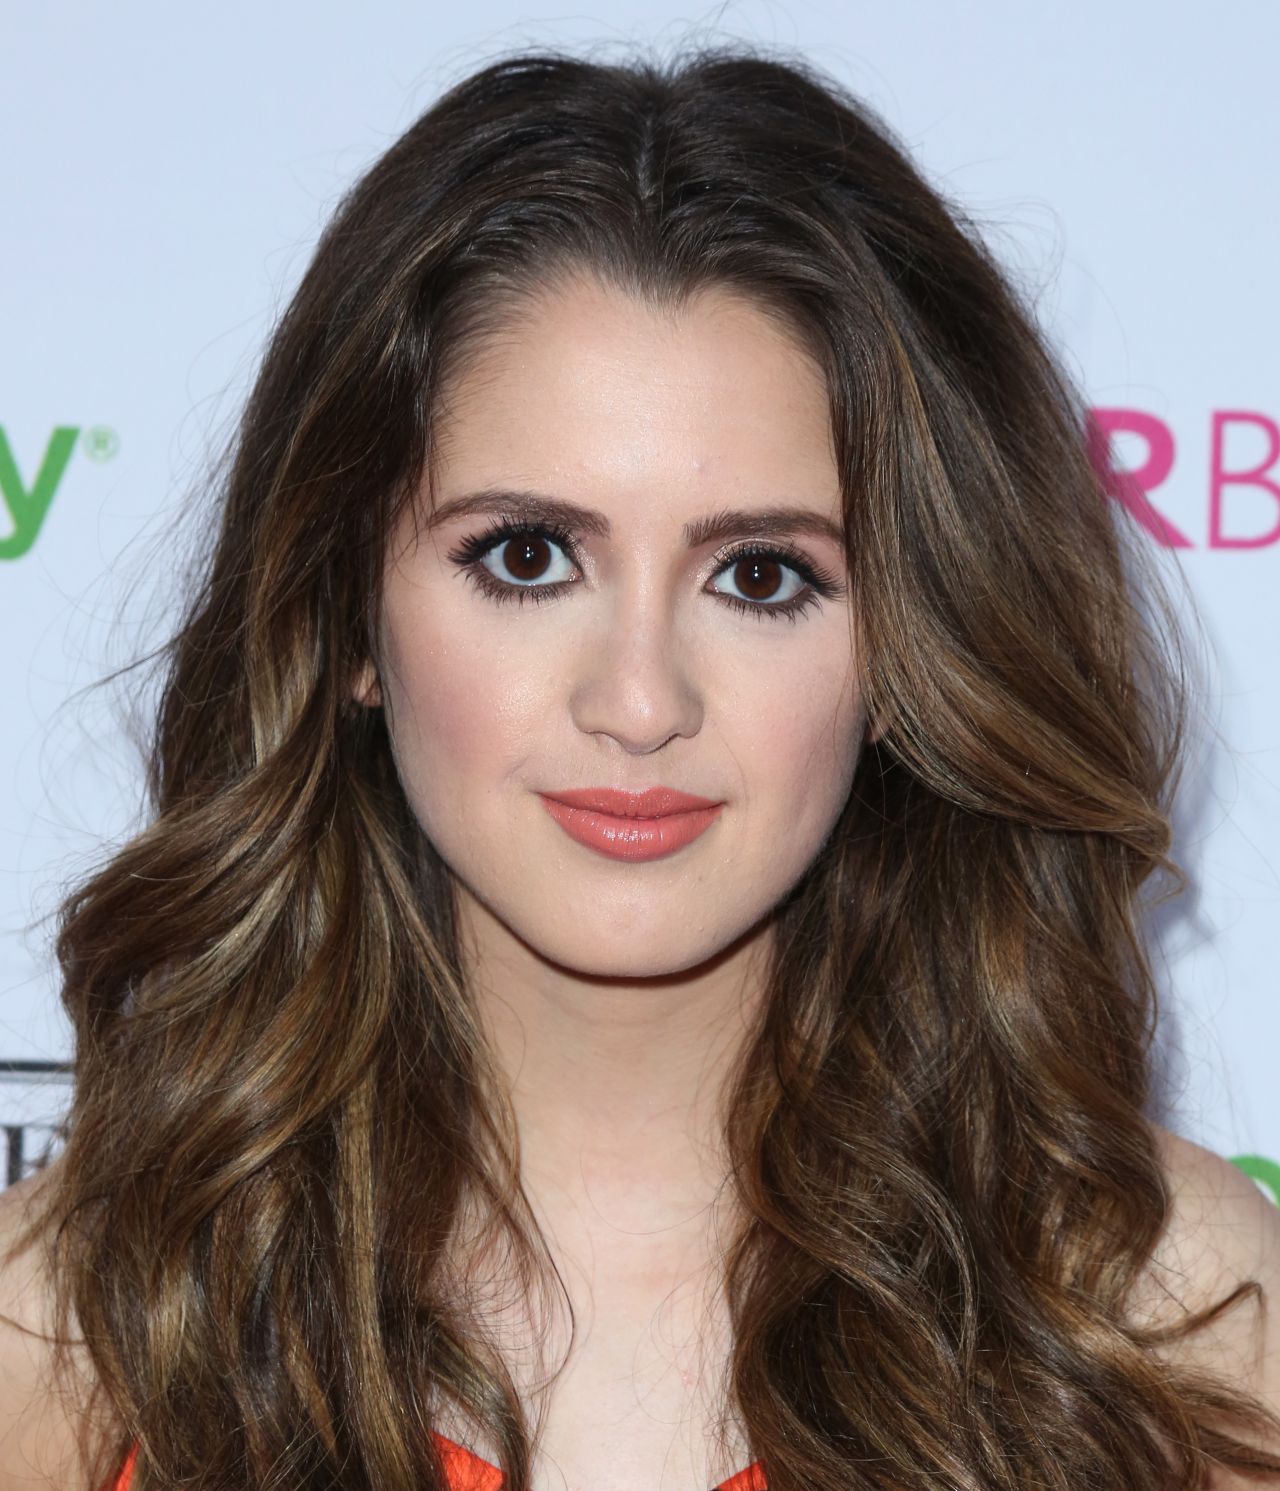 laura-marano-tiger-beat-magazine-launch-party-in-los-angeles-5-24-2016-3.